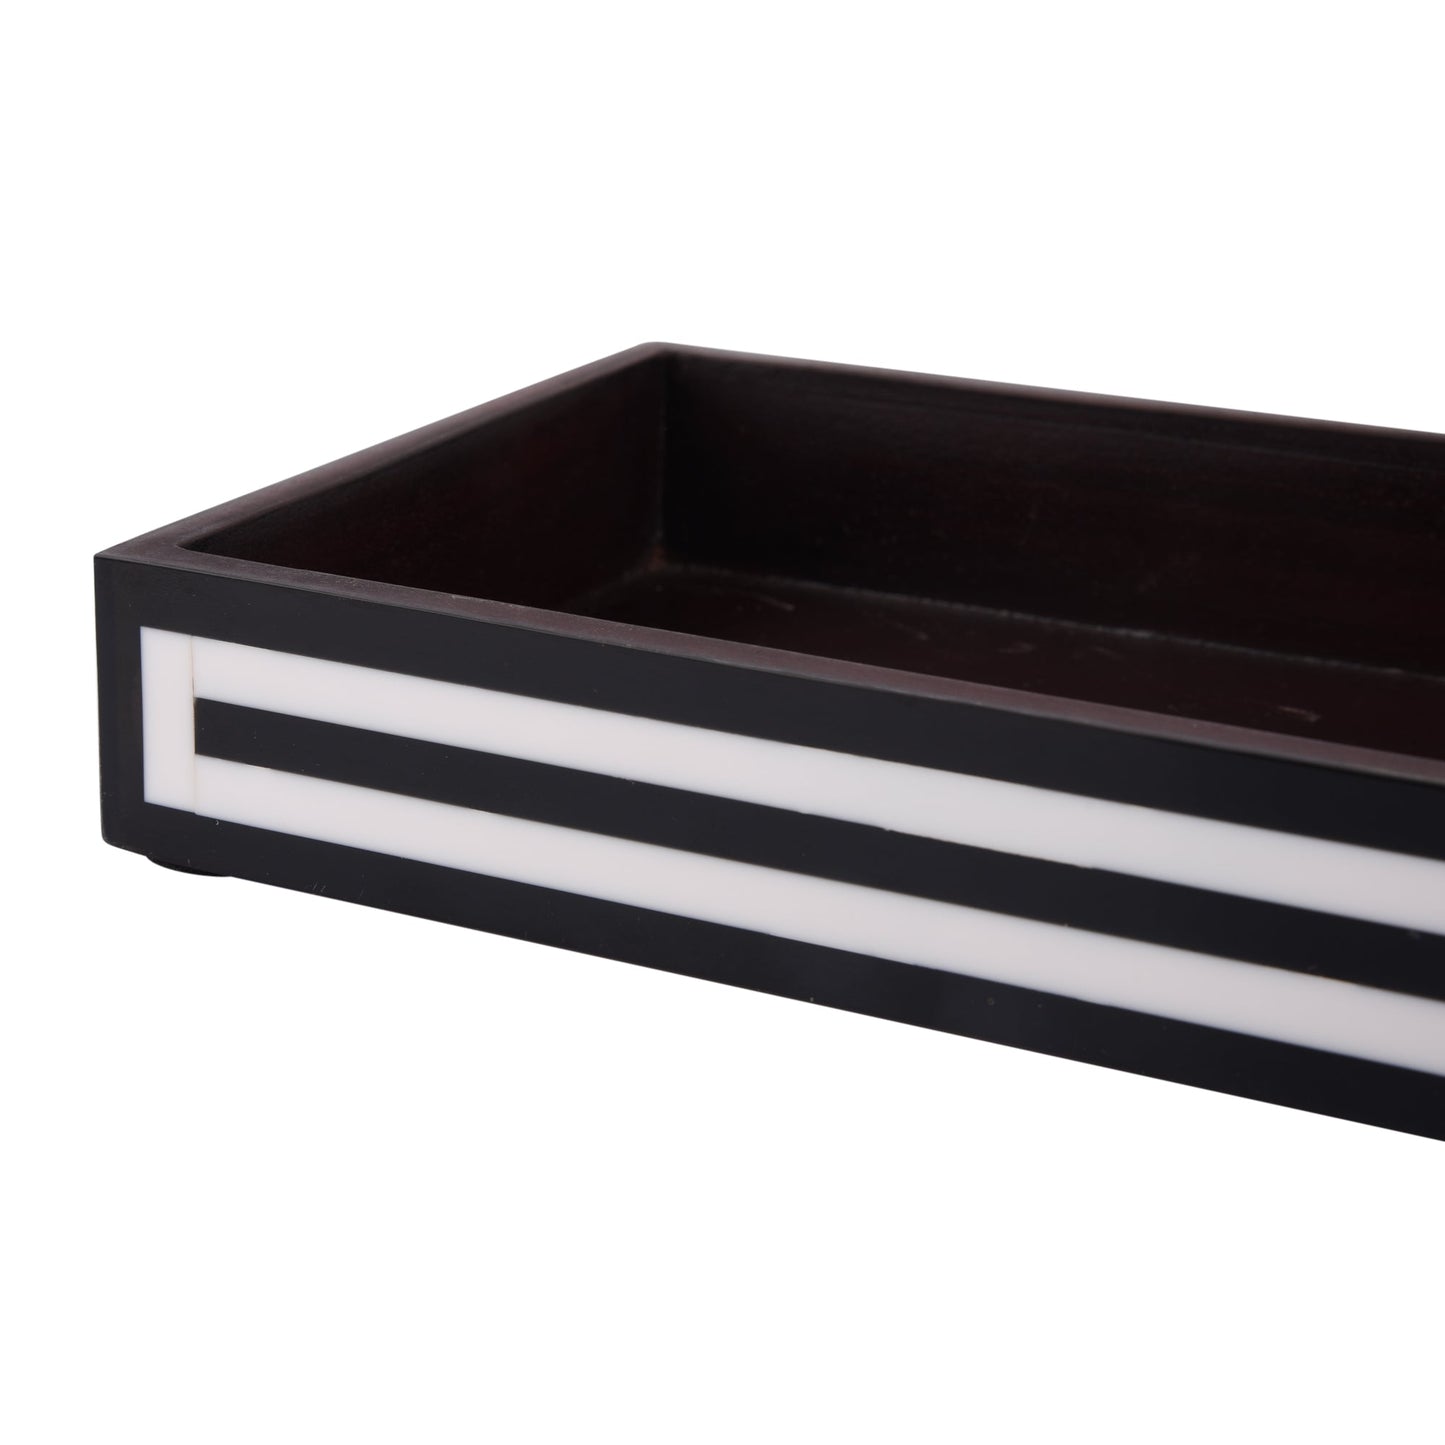 Bathroom Tray Concentric Pattern White & Brown 10x6 Inch